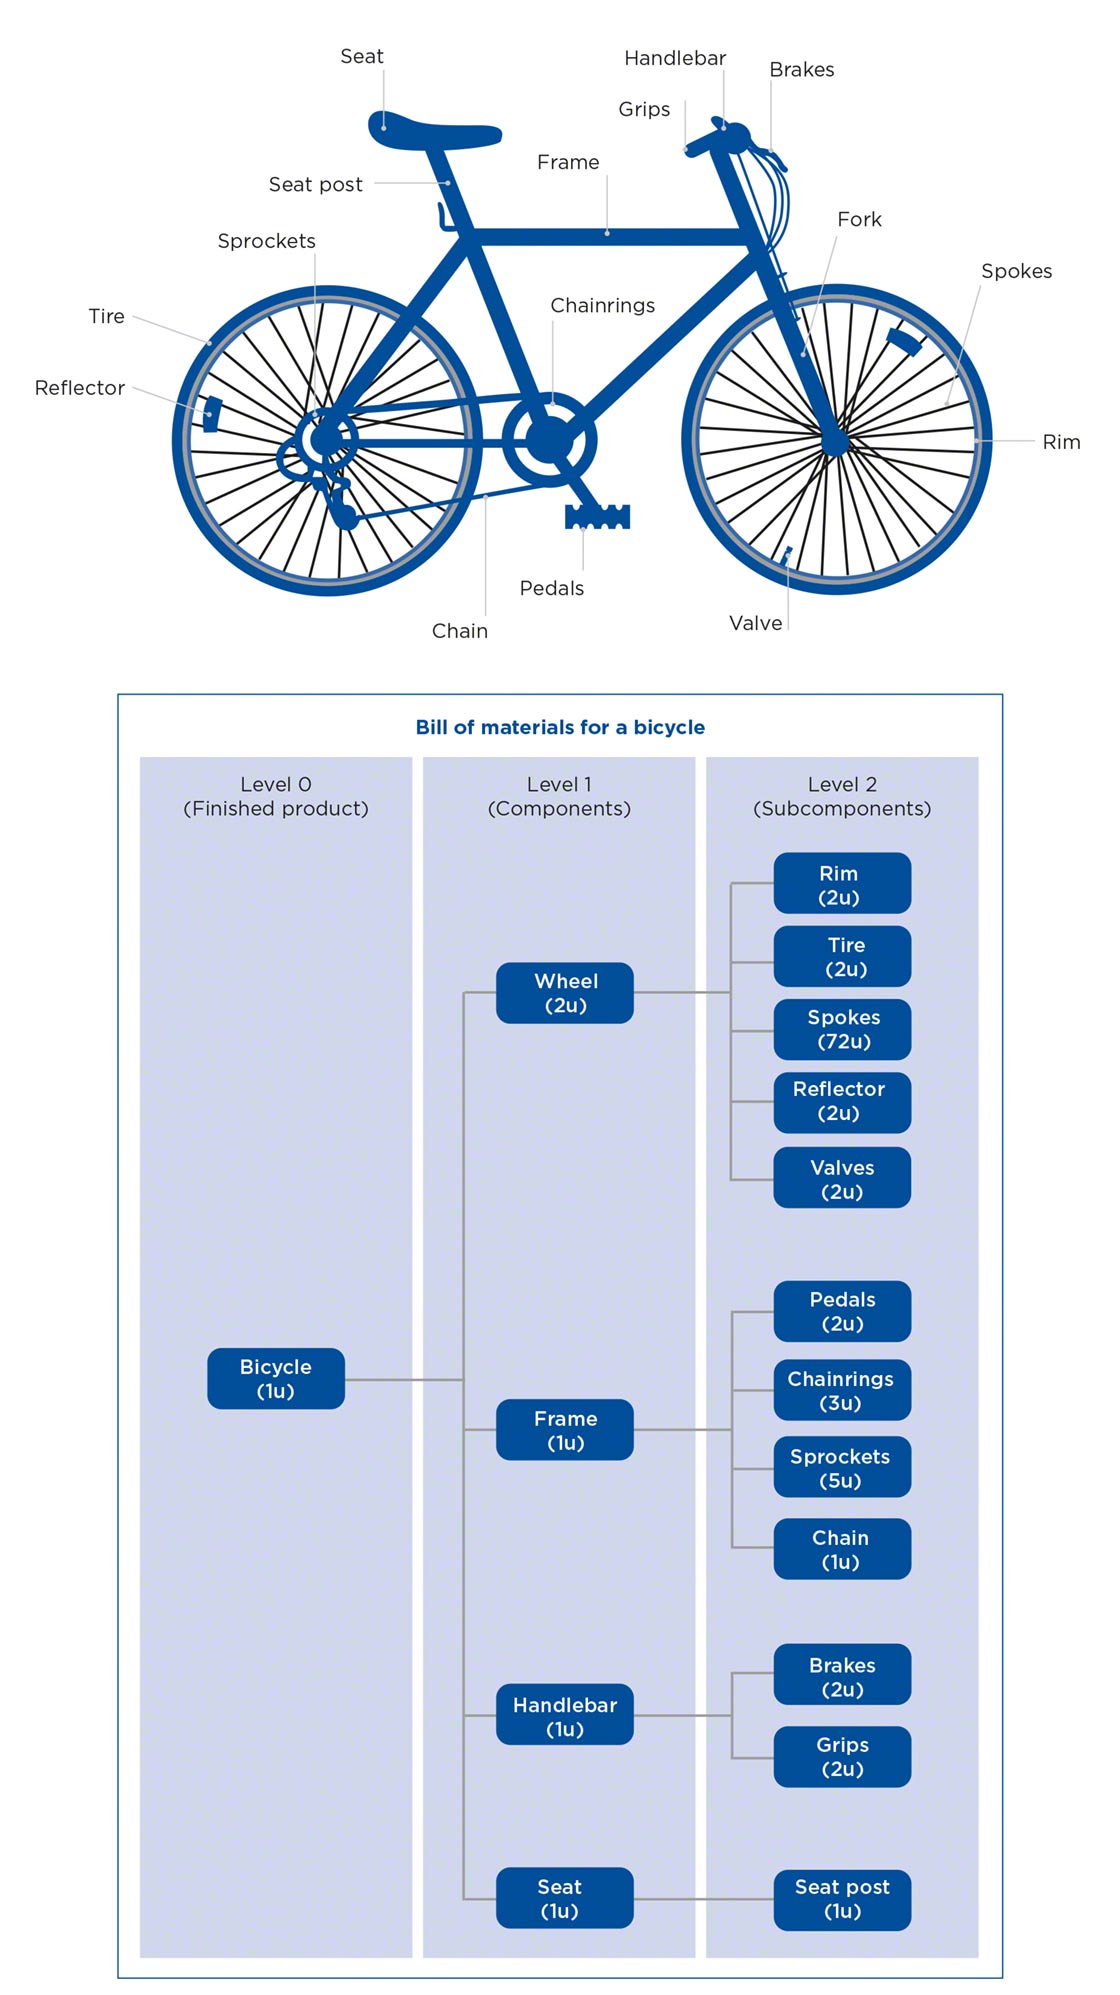 This example shows the bill of materials for a bicycle, with the components arranged in a hierarchical fashion